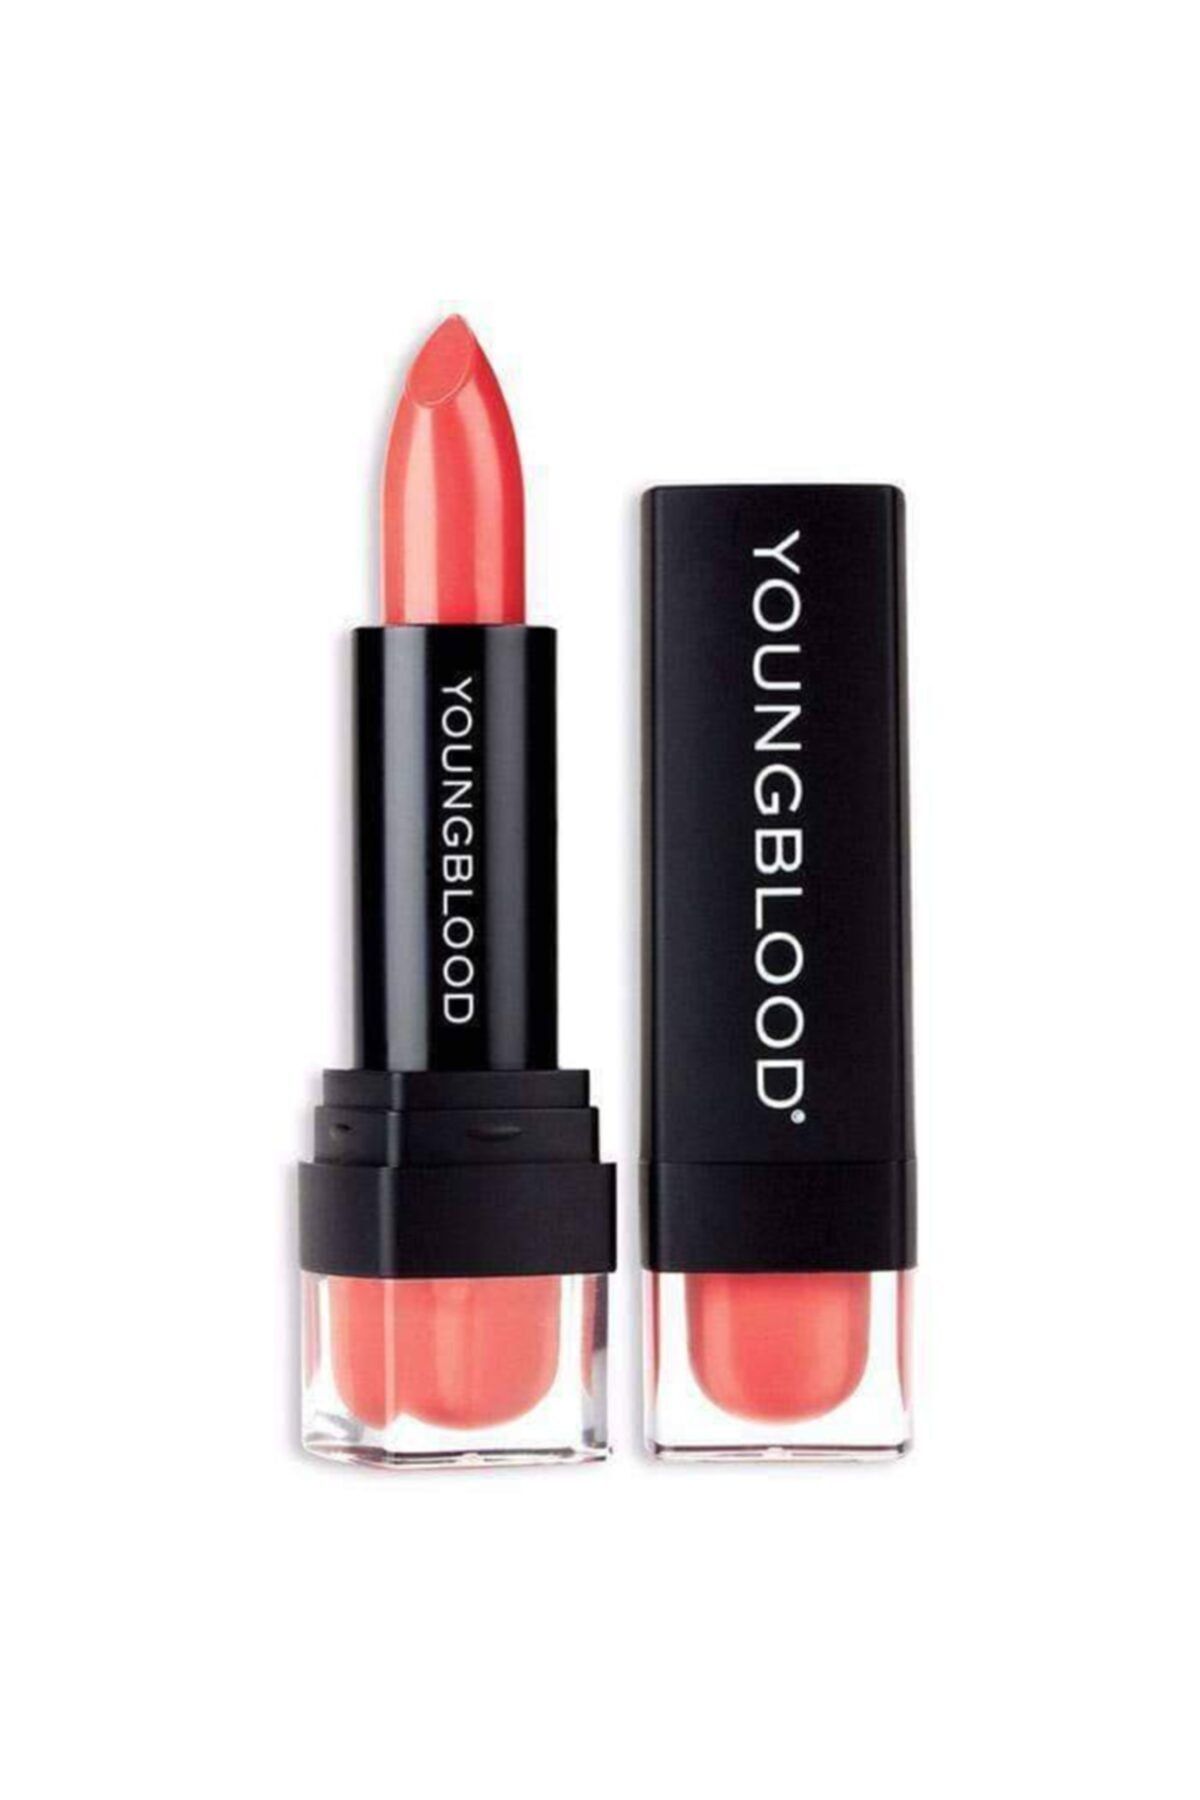 Youngblood Youngblood Mineral Creme Lipstick Mineral Ruj 4 Gr. (tangelo. Turuncu)